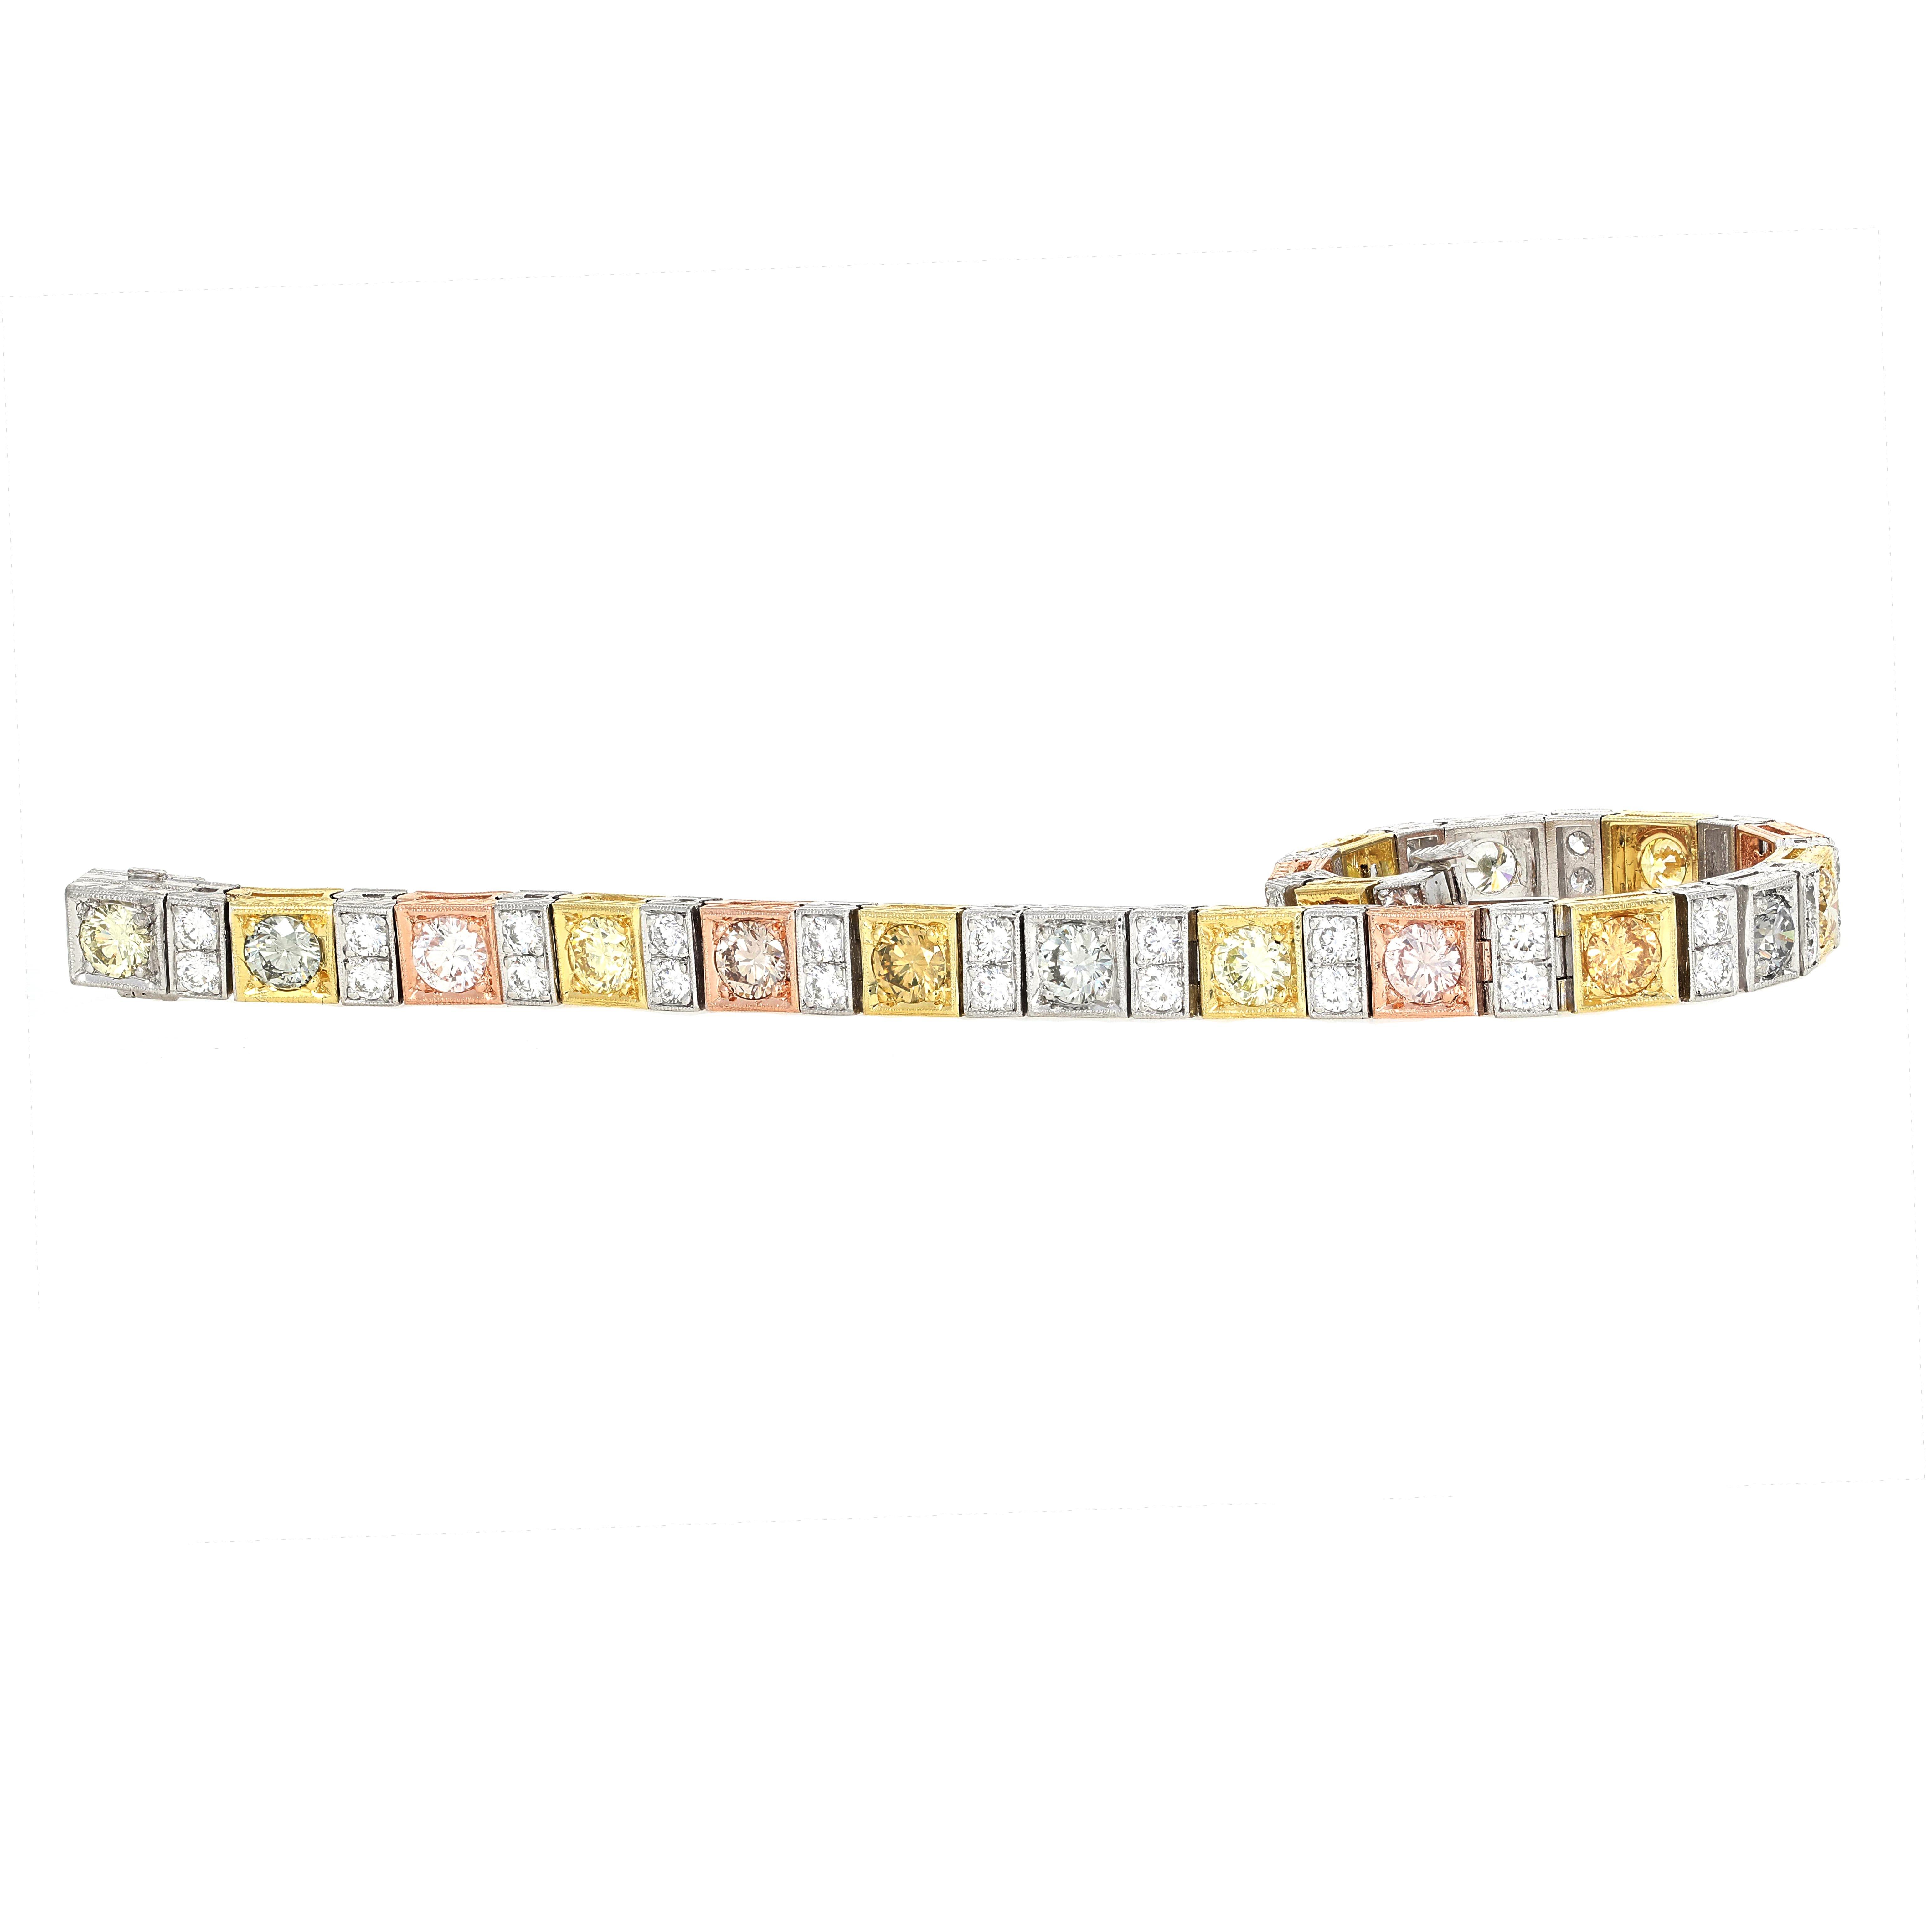 Handmade fancy color diamond tennis bracelet set in 18 karat white, yellow and rose gold. One of the most rare and unique tennis bracelets you will find. All of the center stones are GIA certified and measure between 0.32 carats and 0.48 carats.